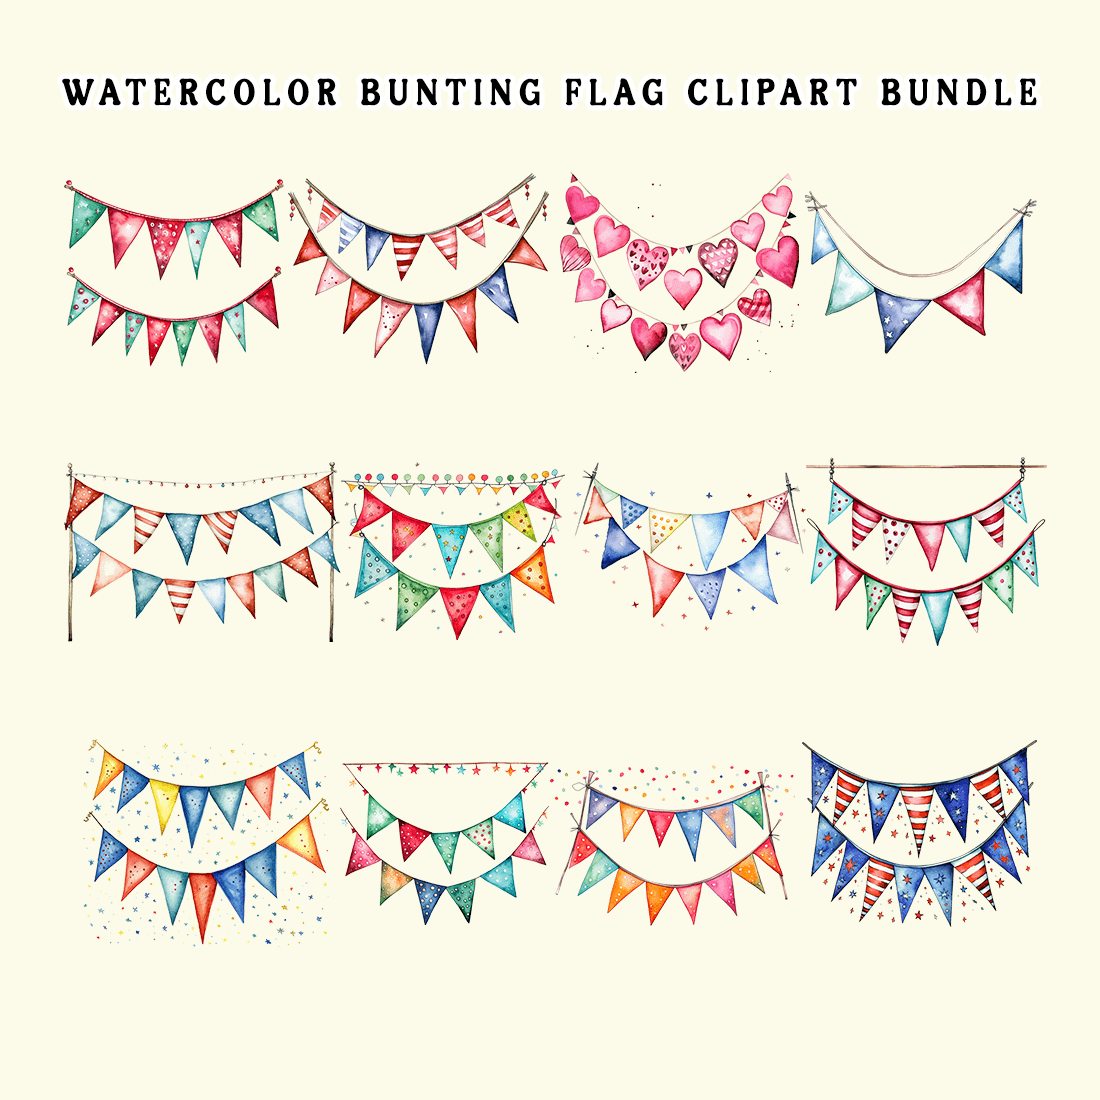 Watercolor Bunting Flag Clipart Bundle preview image.